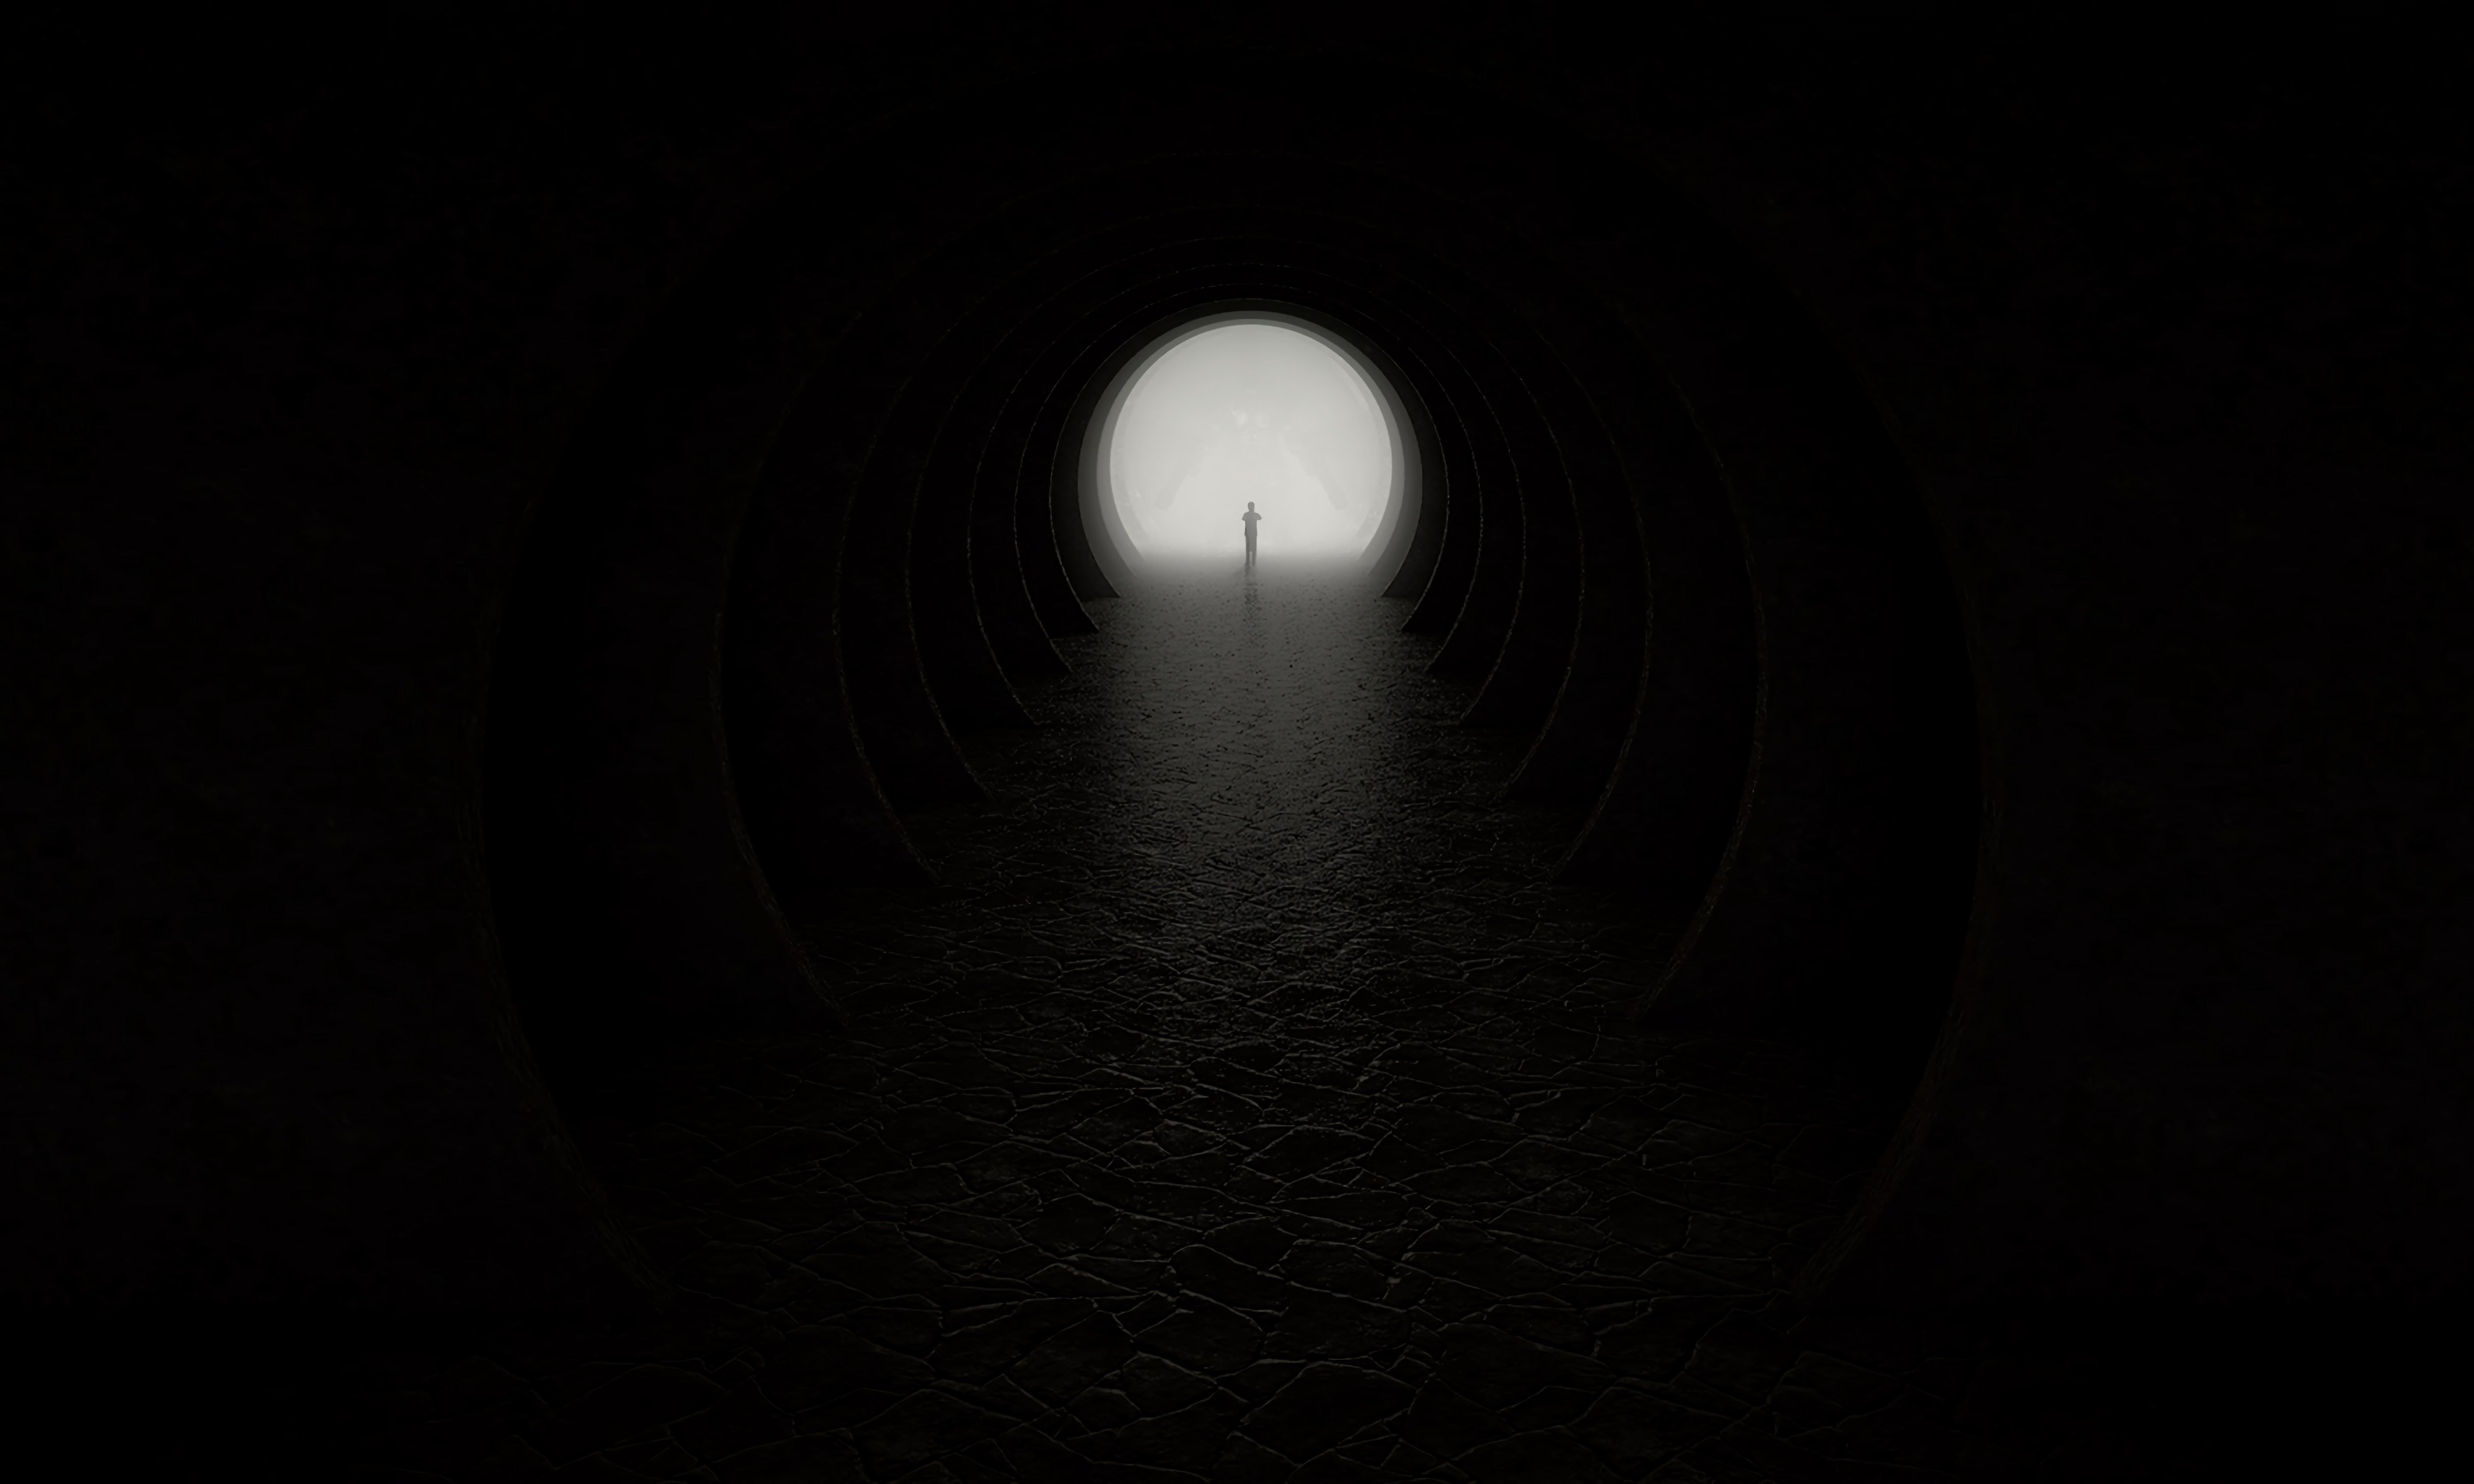 darkness, output, exit, silhouette, black, circle, cave